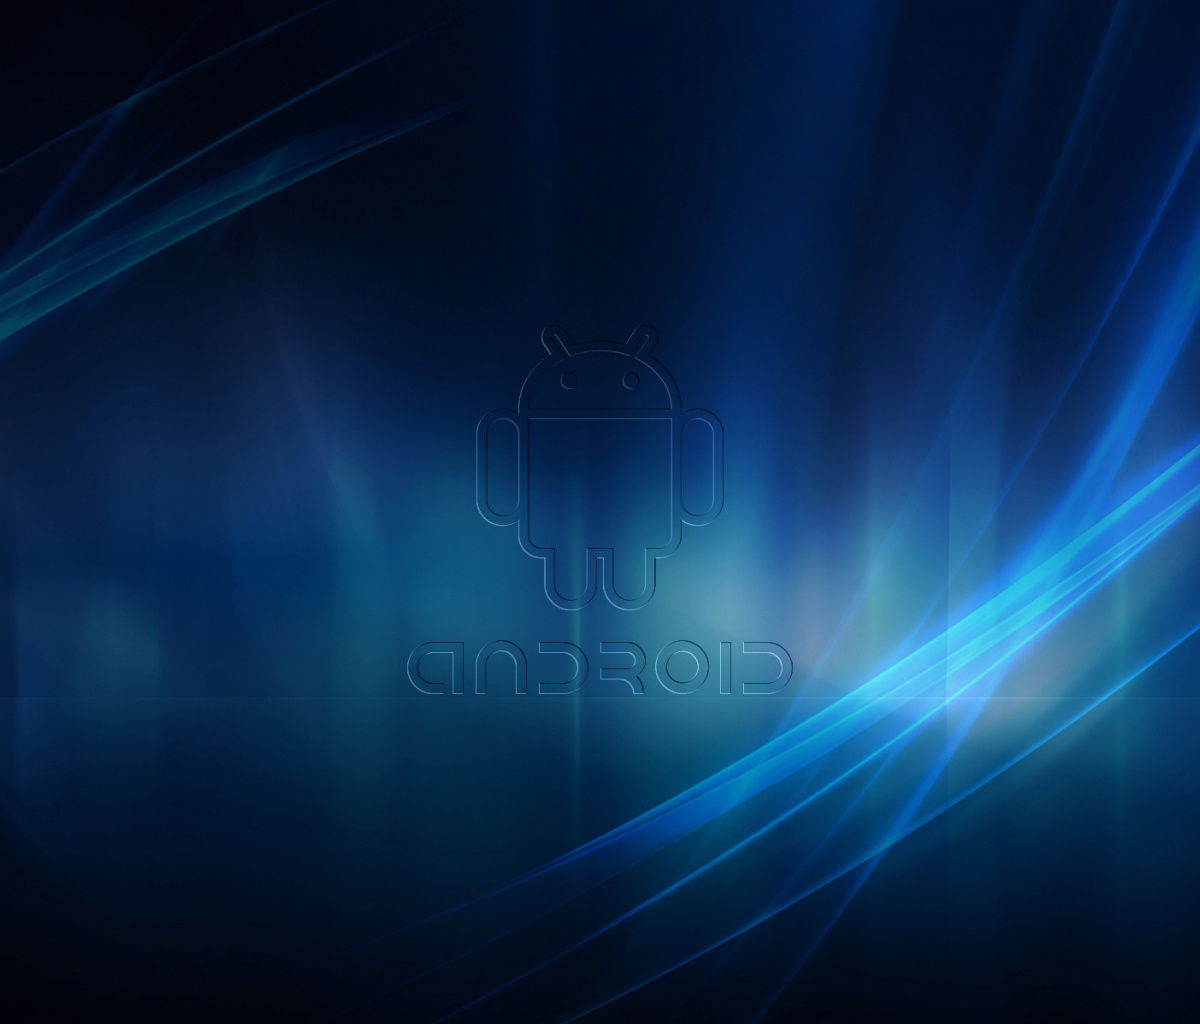 Android Robot wallpaper 1200x1024